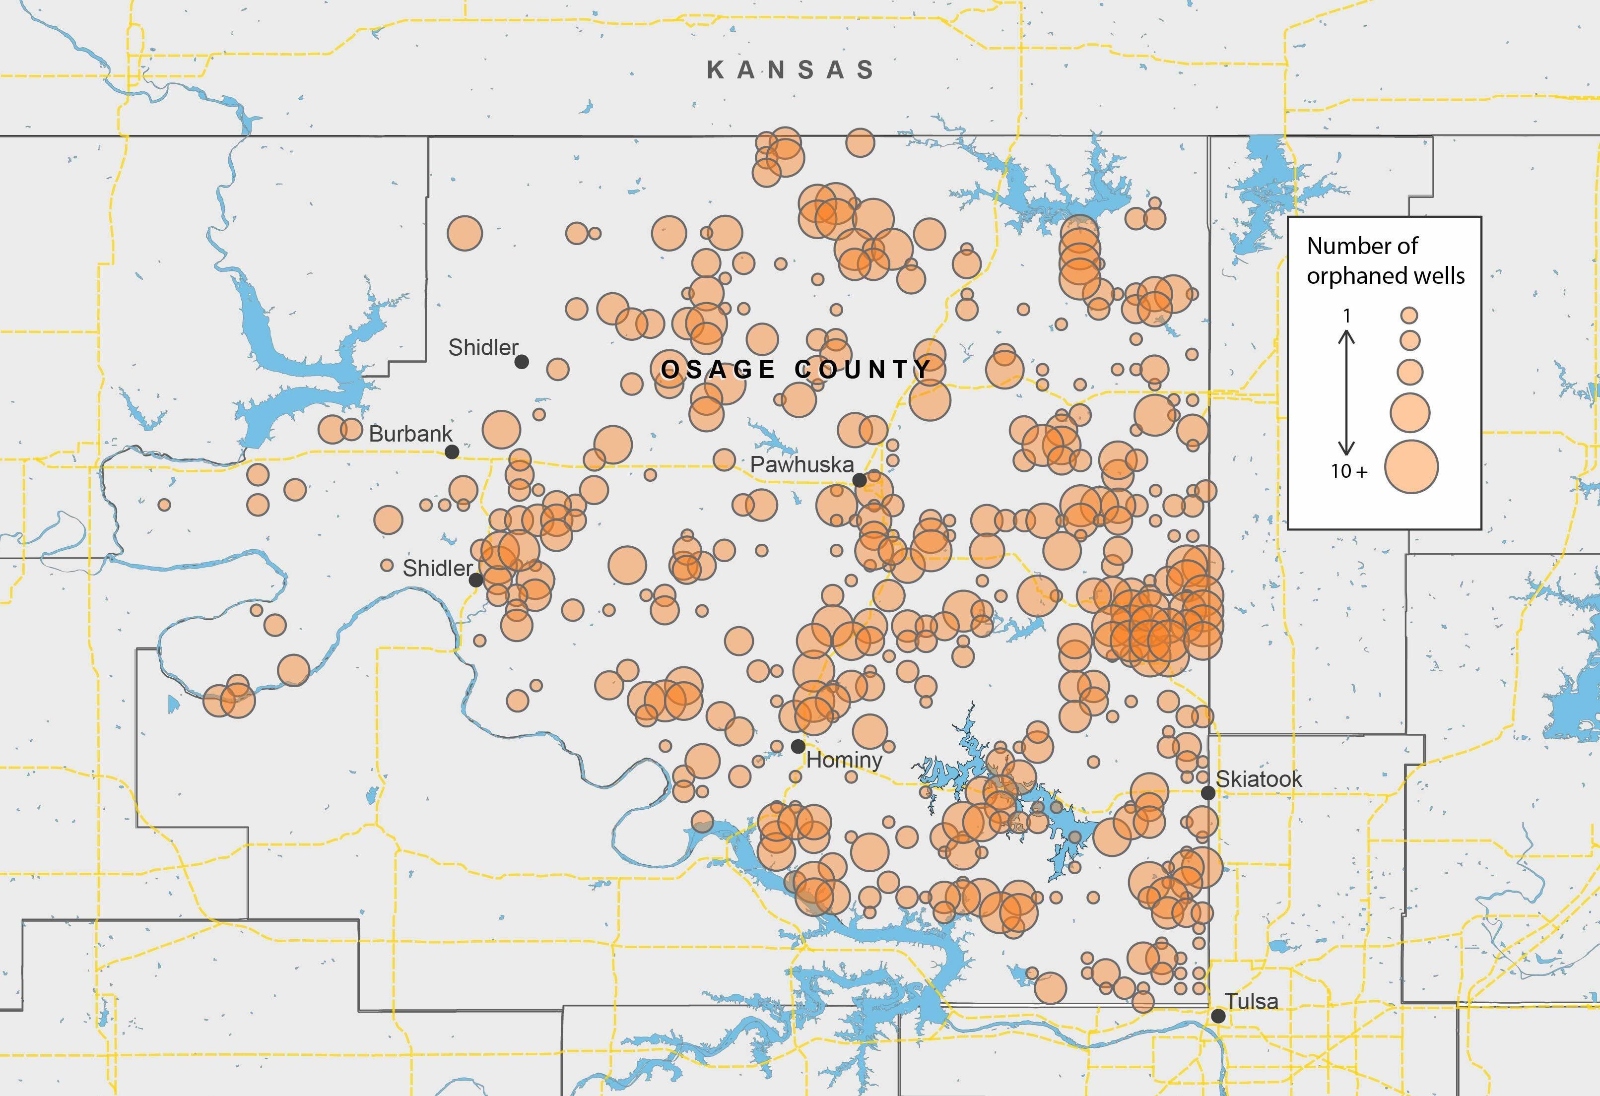 Map showing the number of orphaned wells in Osage County